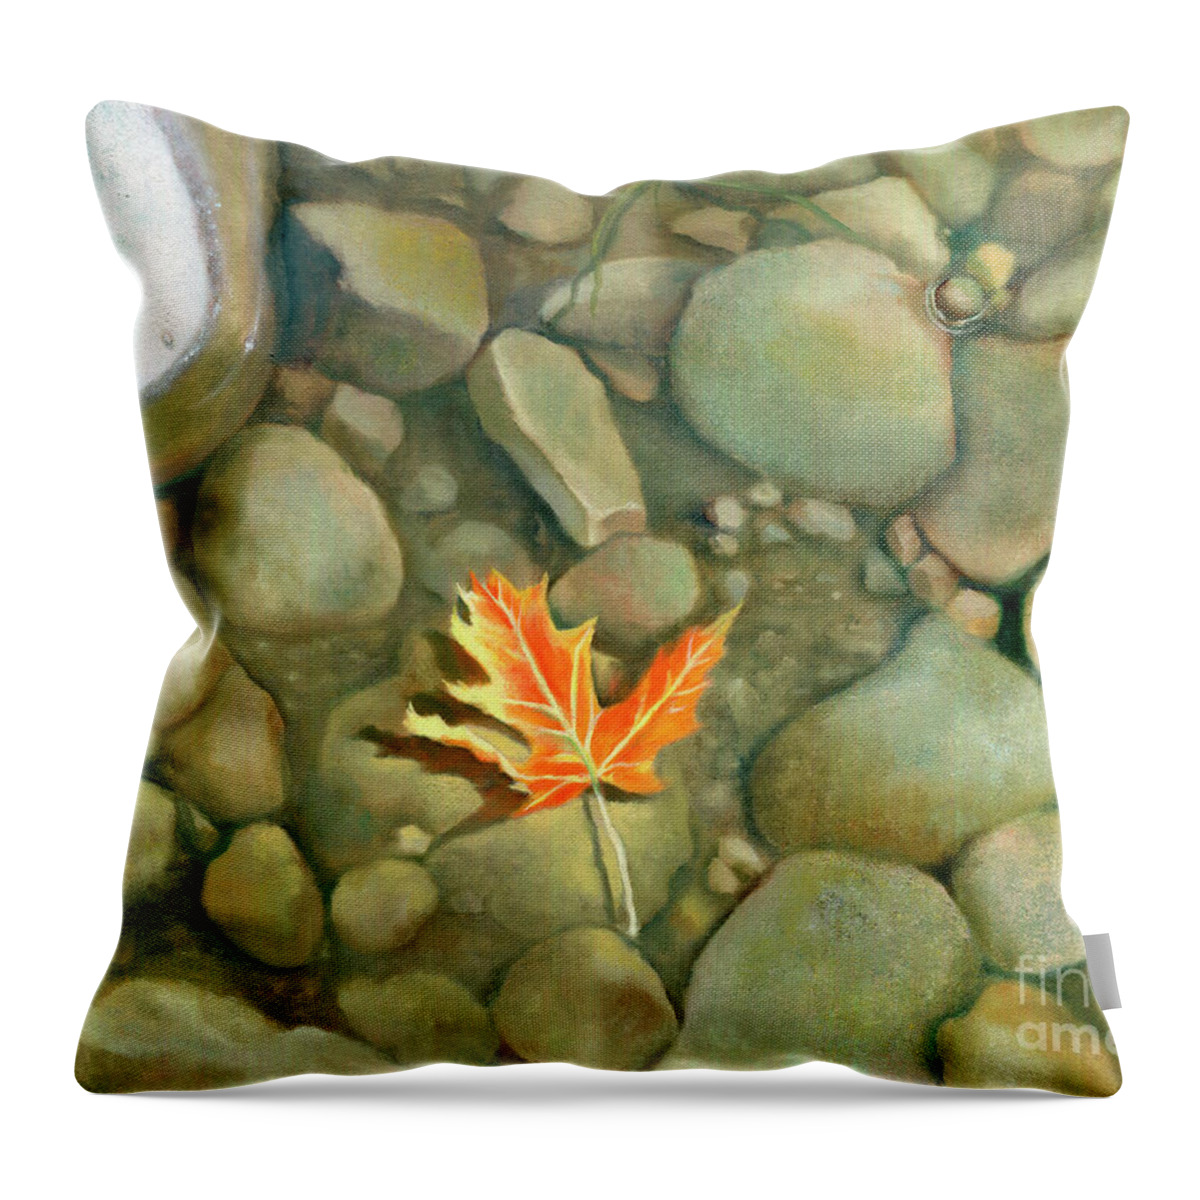 Rocks Throw Pillow featuring the painting A Perfect Serenity by Marlene Book